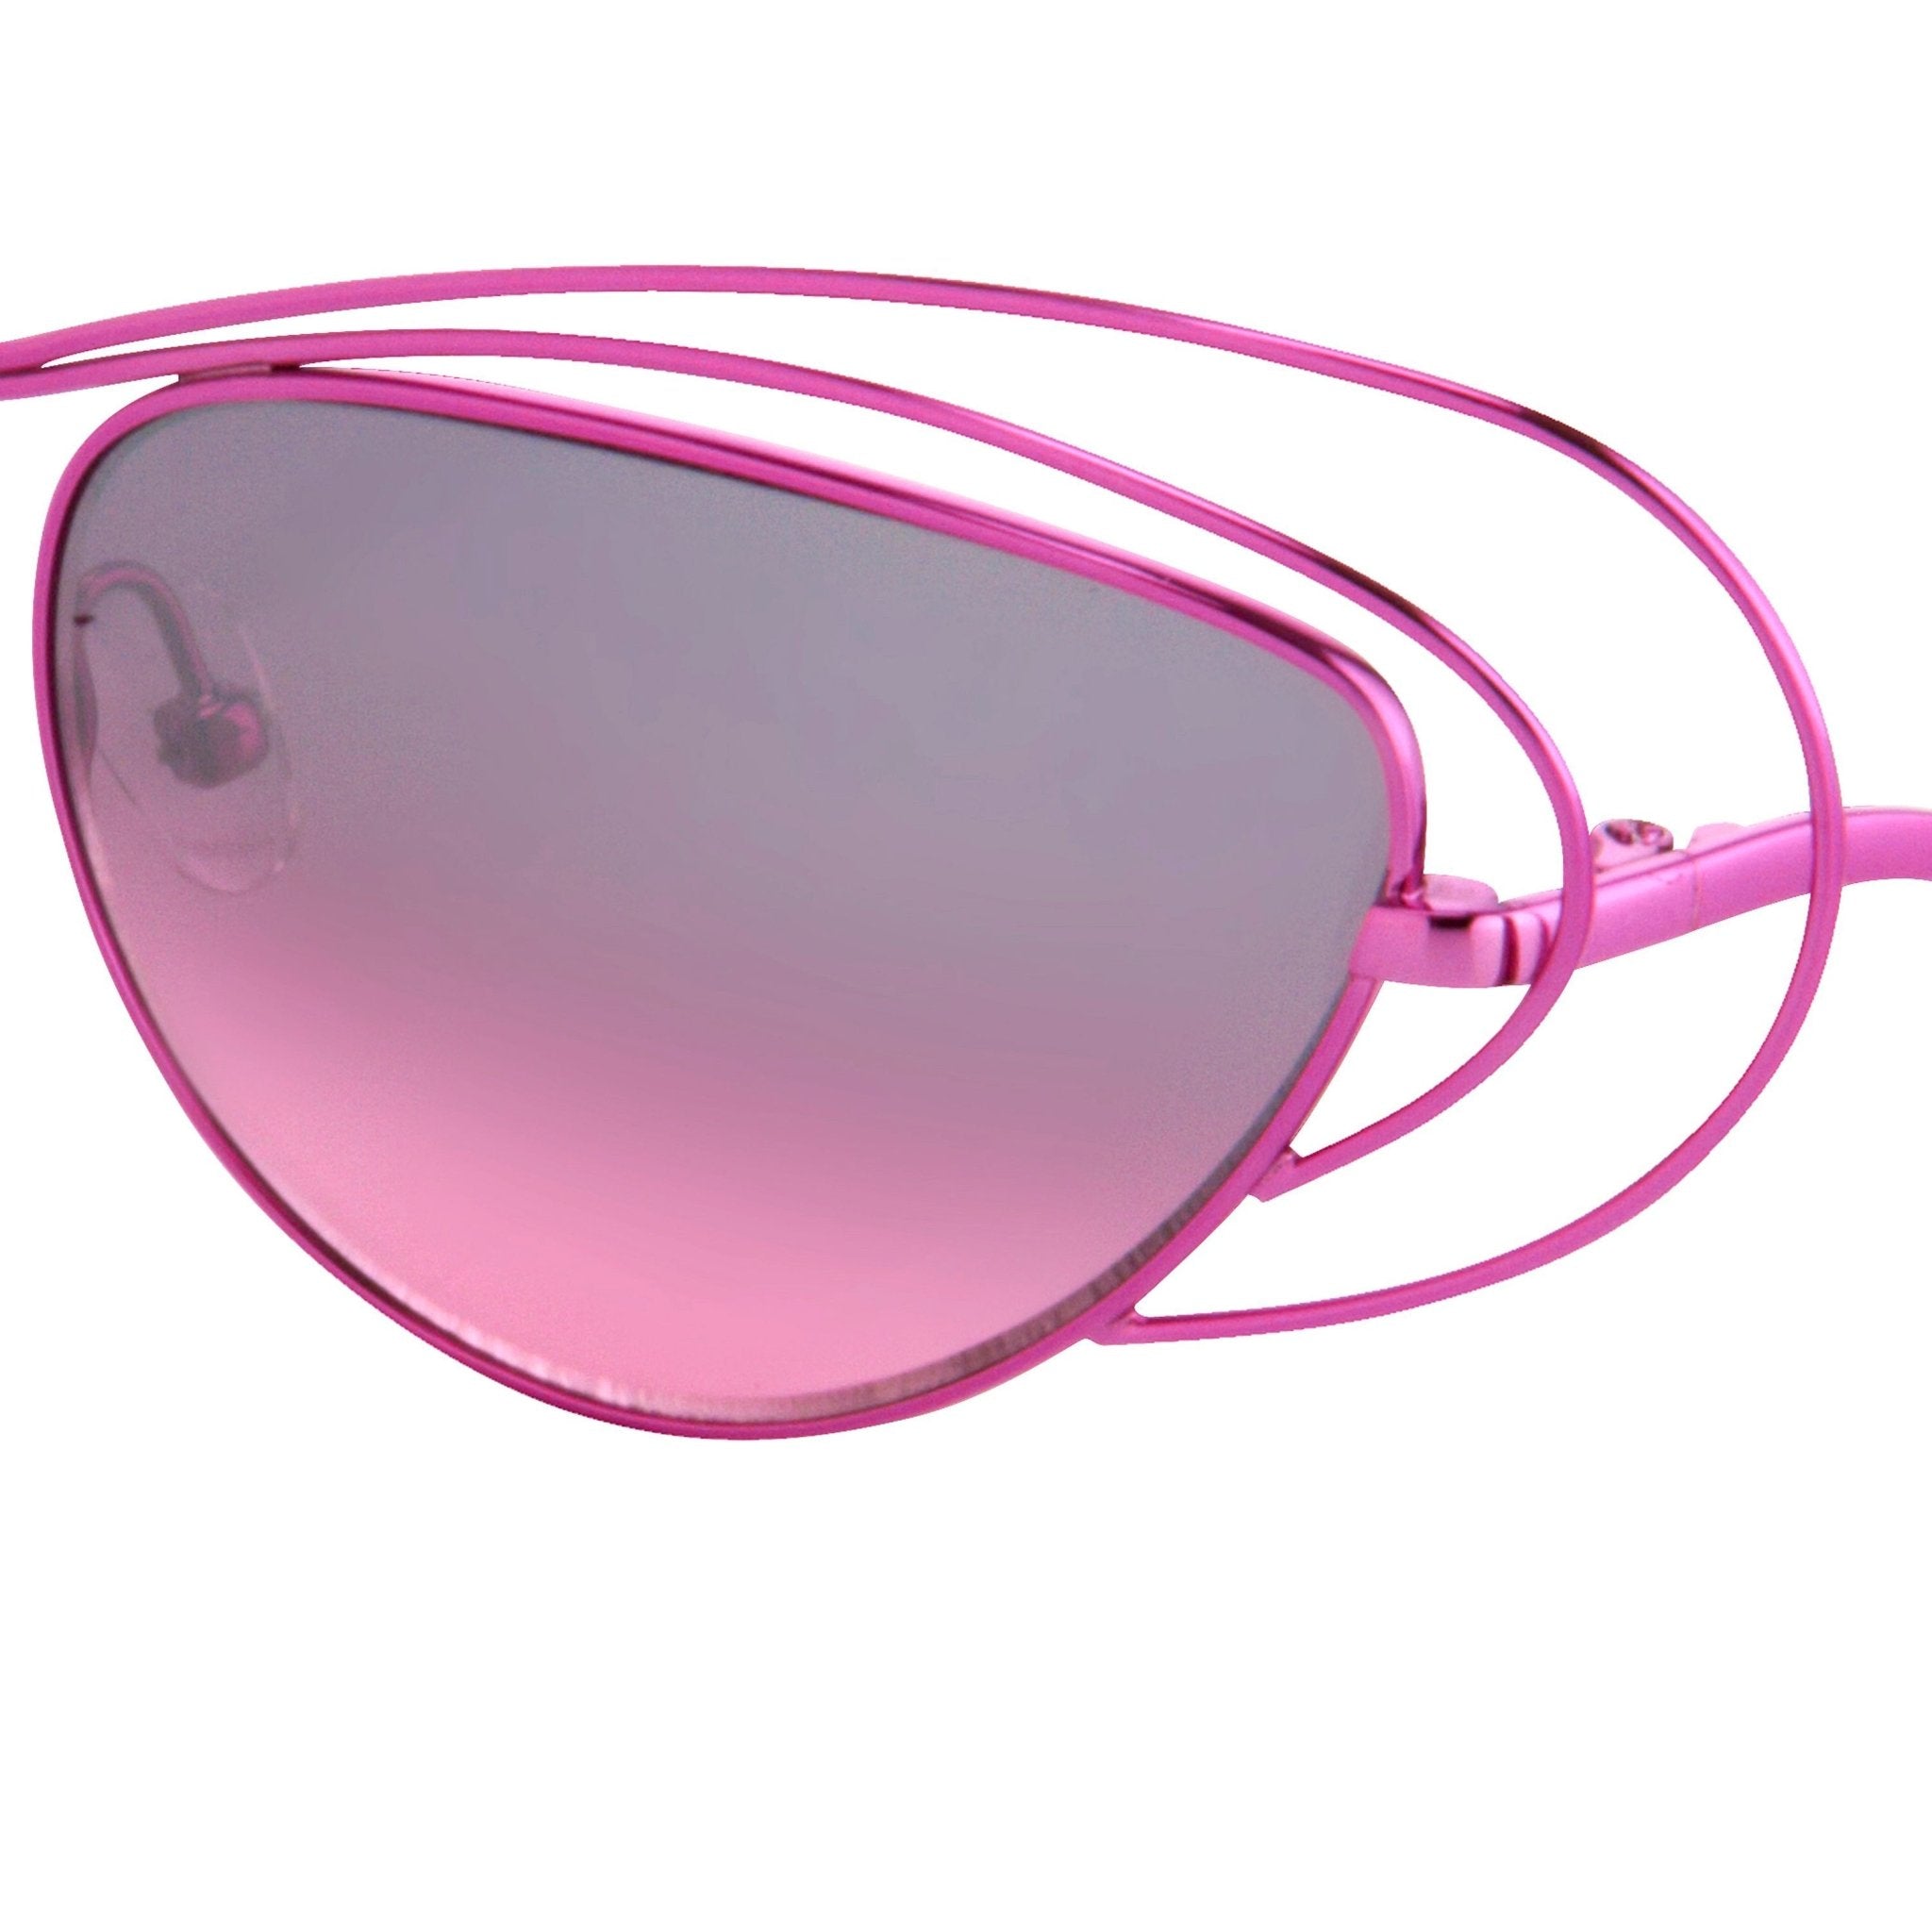 Erdem Women Sunglasses Special Frame Purple with Pink/Grey Graduated Mirrored Lenses Category 3 - EDM2C1SUN - Watches & Crystals